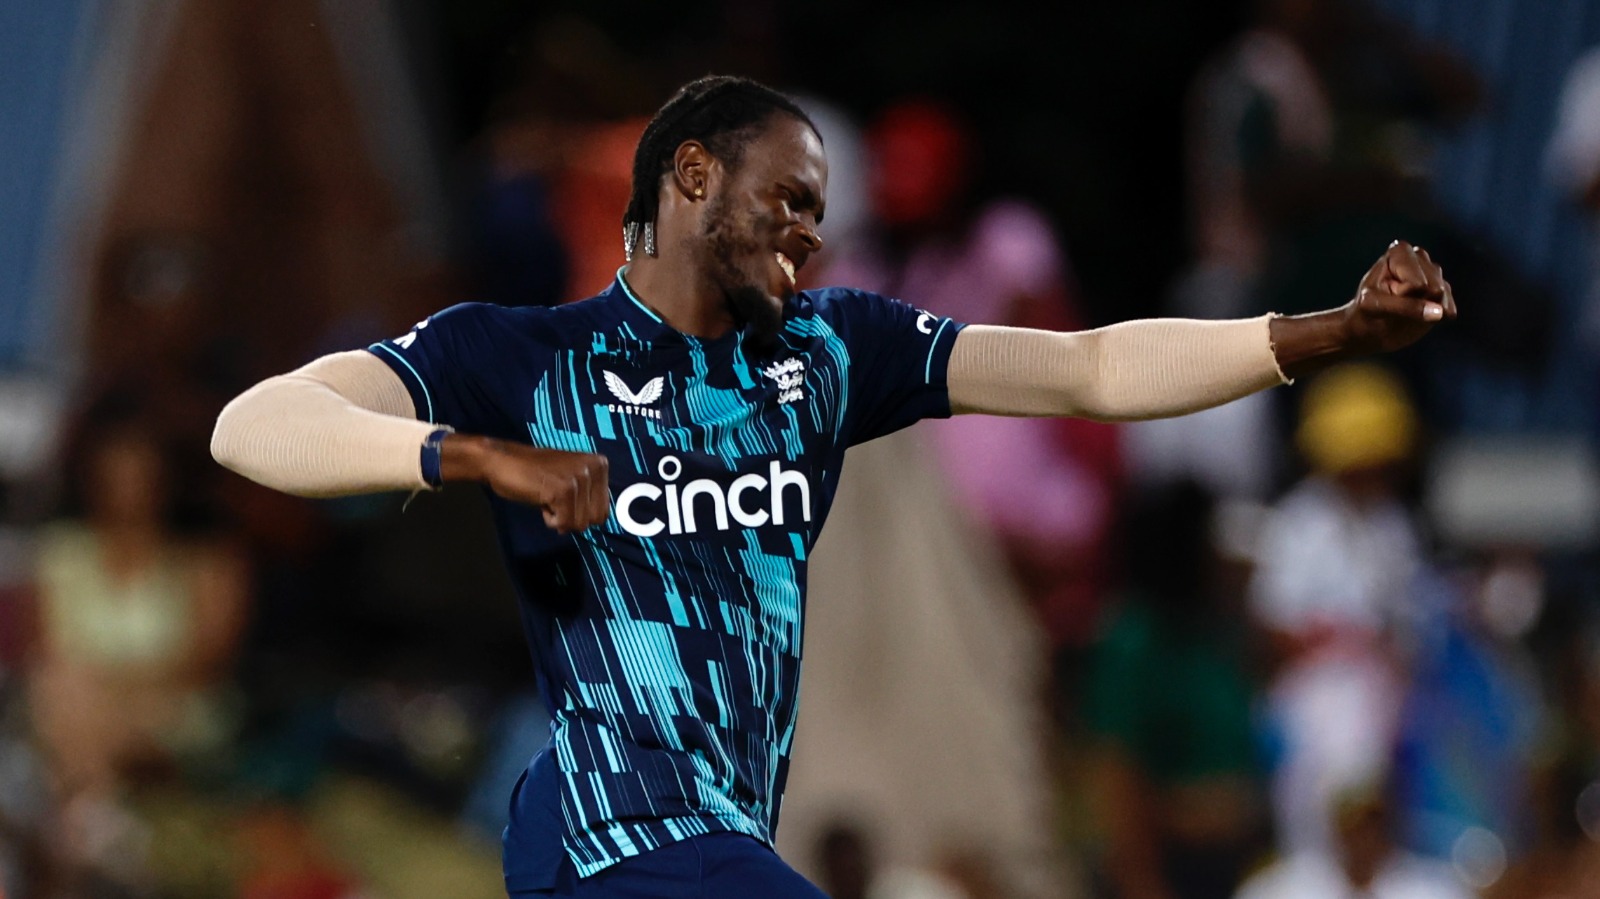 6 WICKETS! Jofra Archer is back